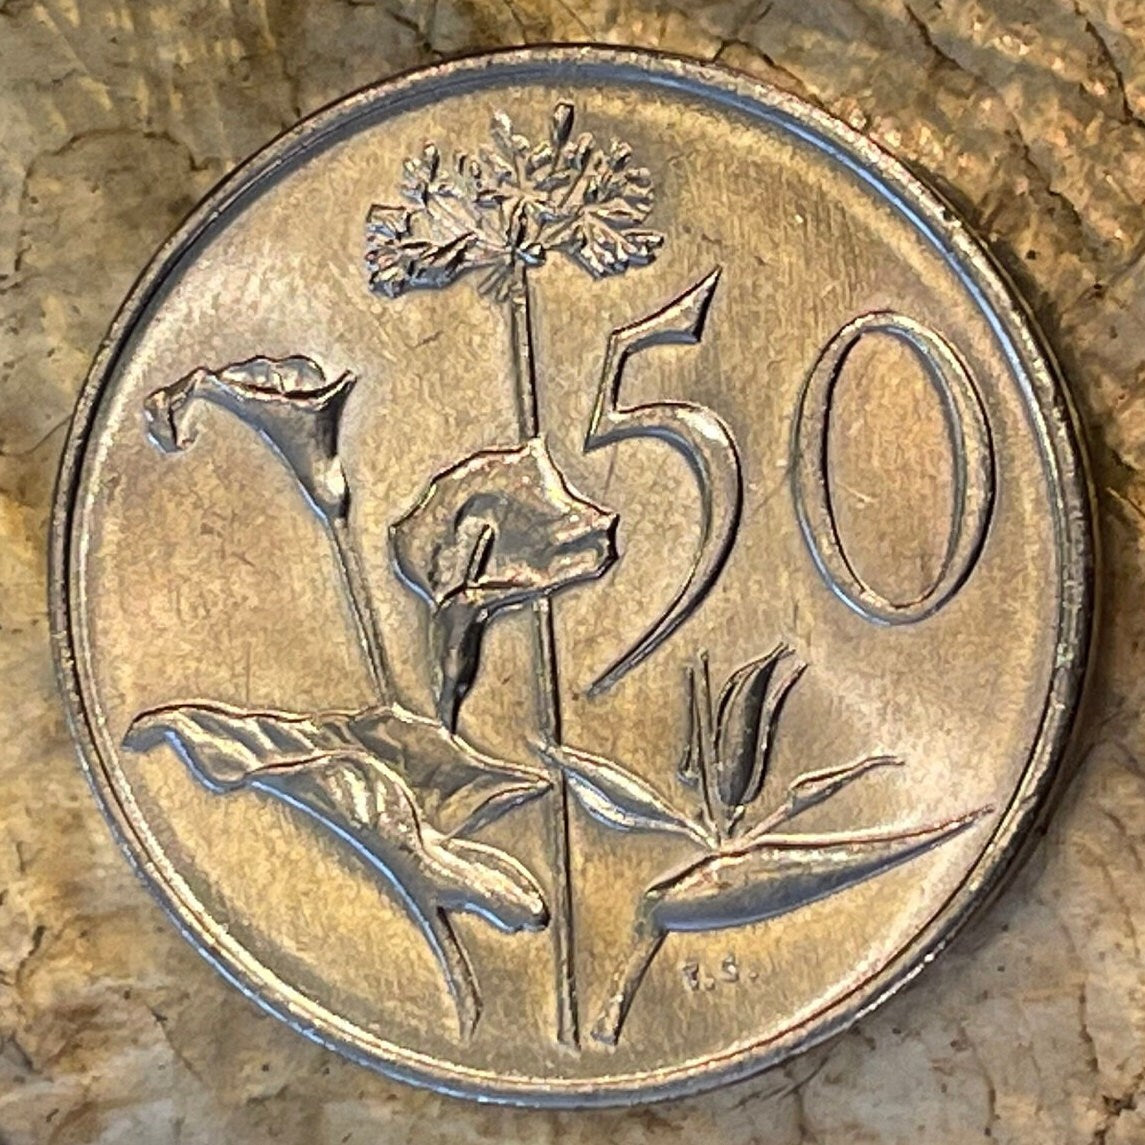 Calla Lily, African Lily, Bird of Paradise Flower 50 Cents South Africa Authentic Coin Money for Jewelry (Arum Lily) (Crane Flower)